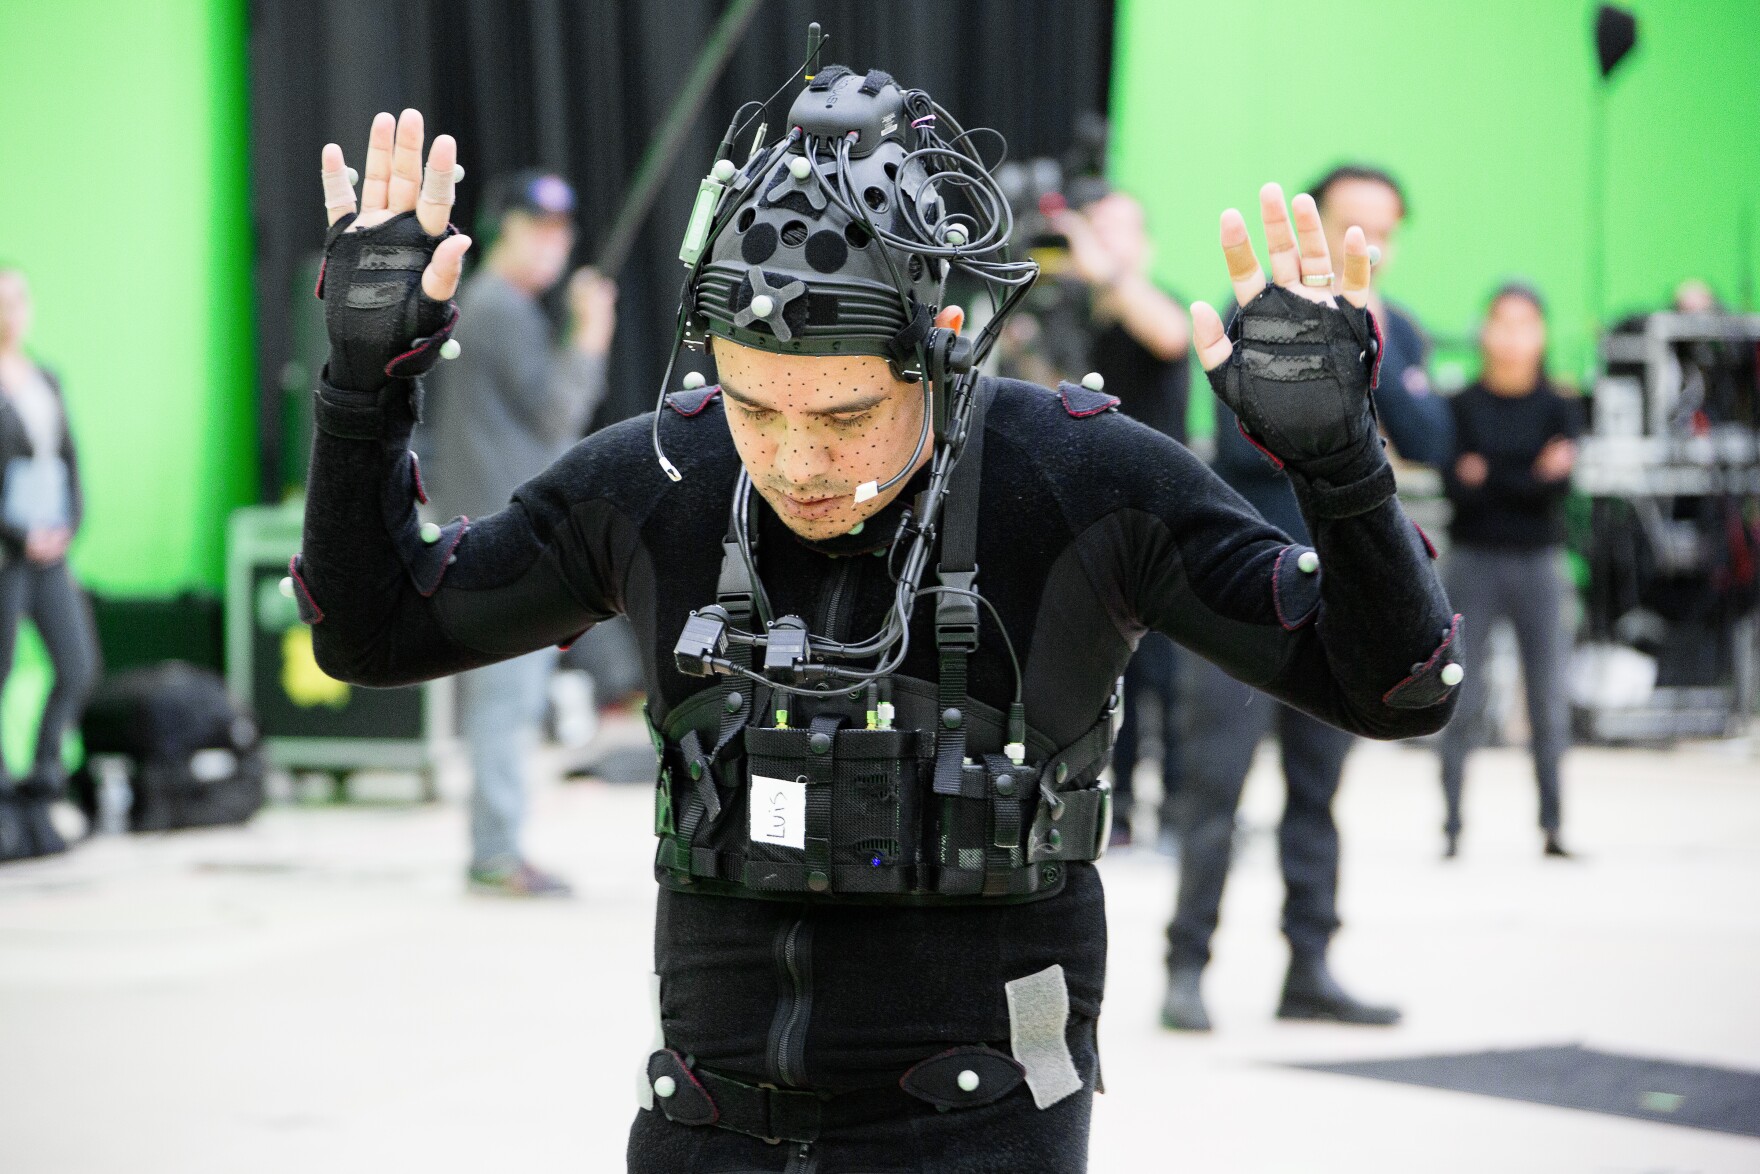 a man wearing black clothes, a helmet and a device over his shoulders and chest to capture his motion, with a green screen in the background